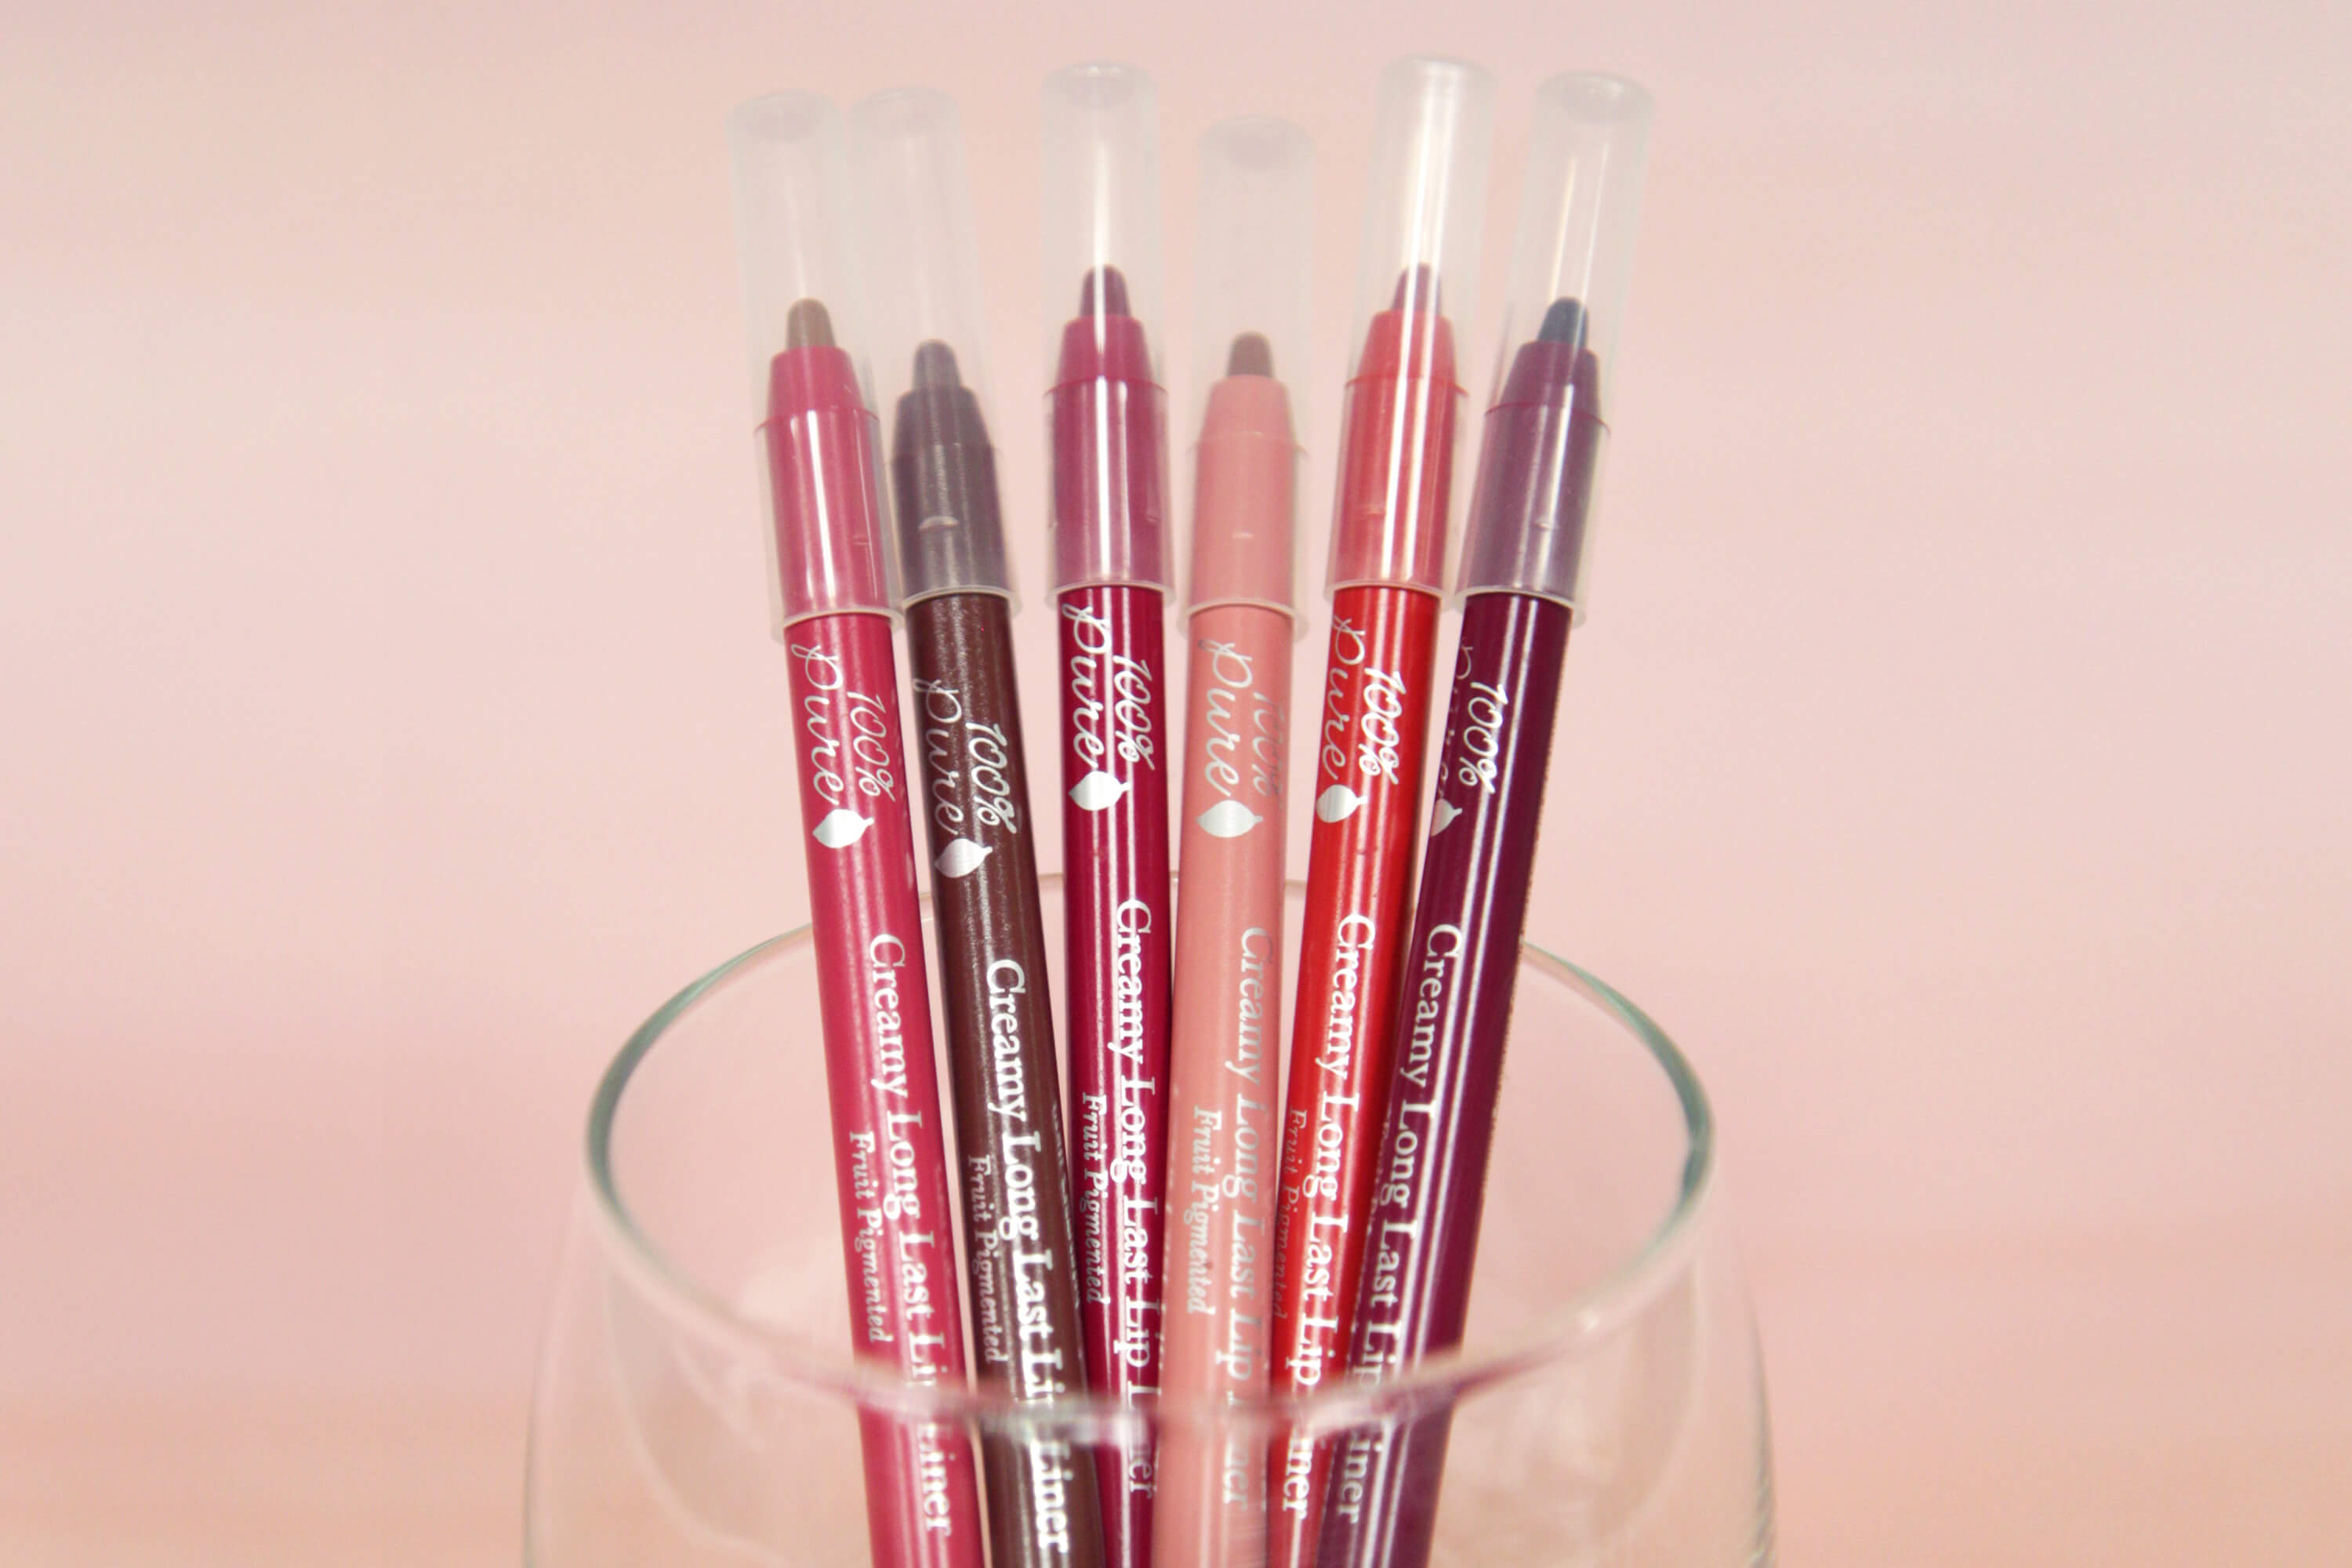 100% PURE Lip Liners in jar